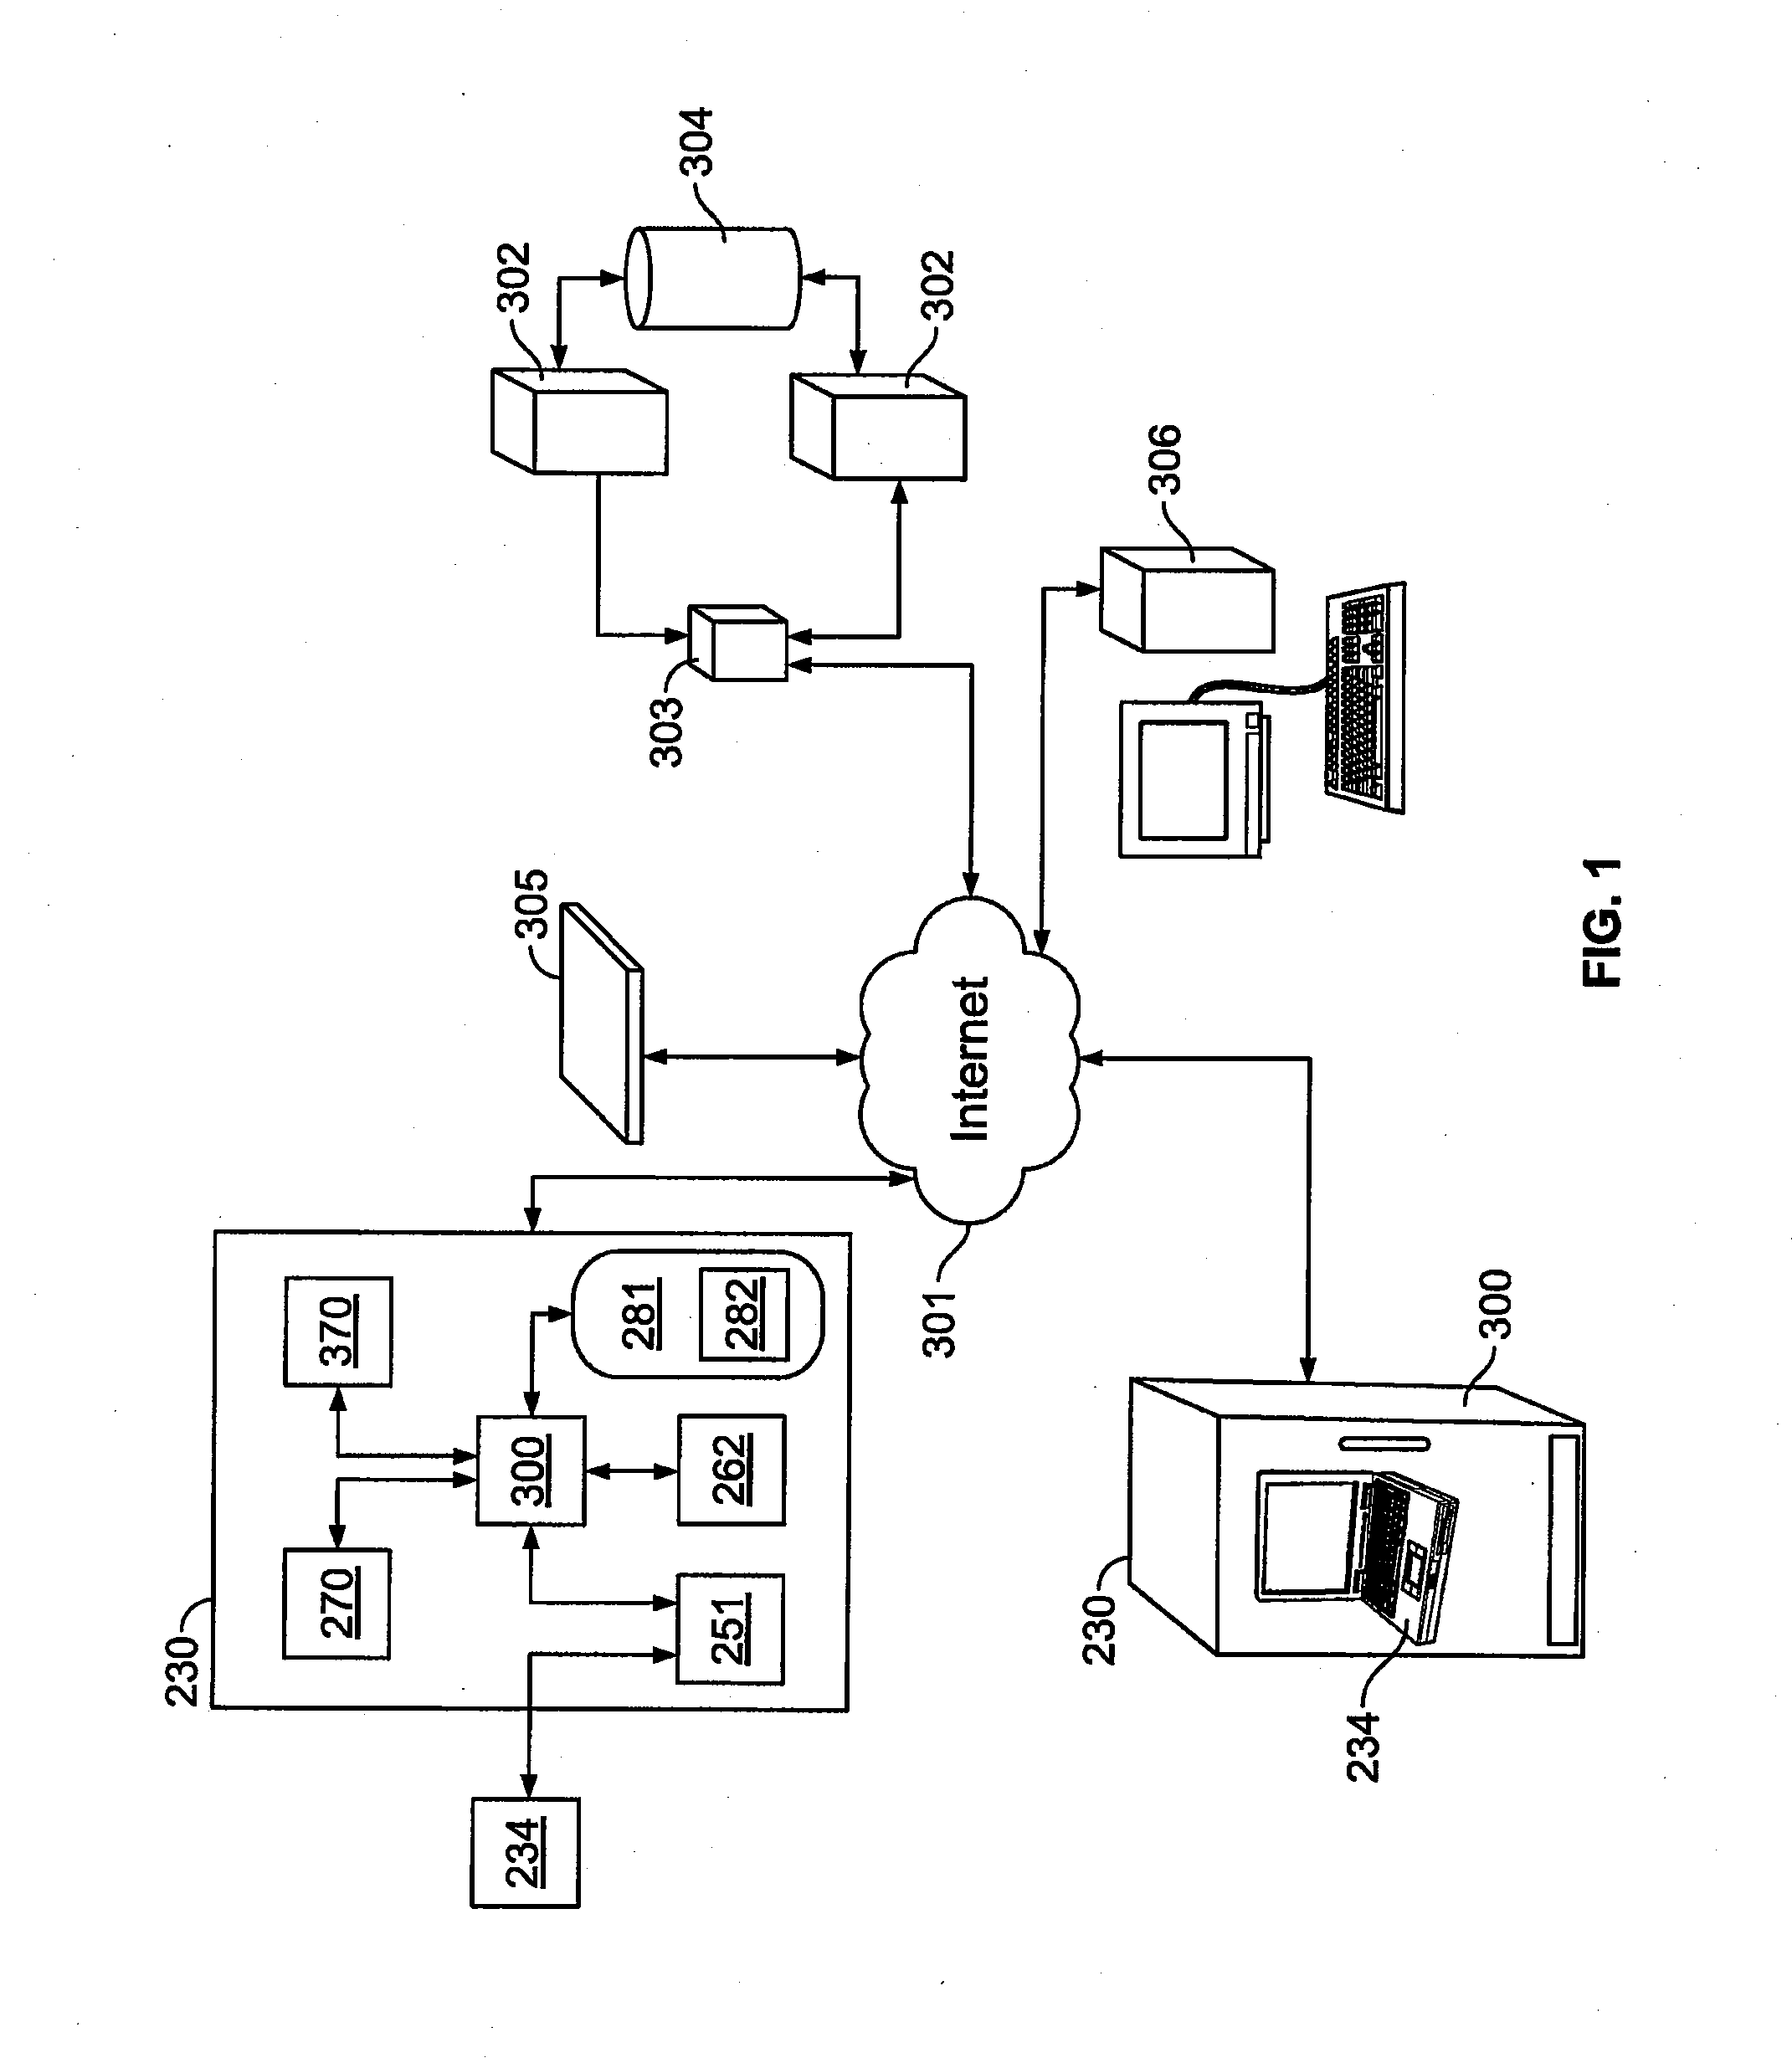 Article vending machine and method for auditing inventory while article vending machine remains operational